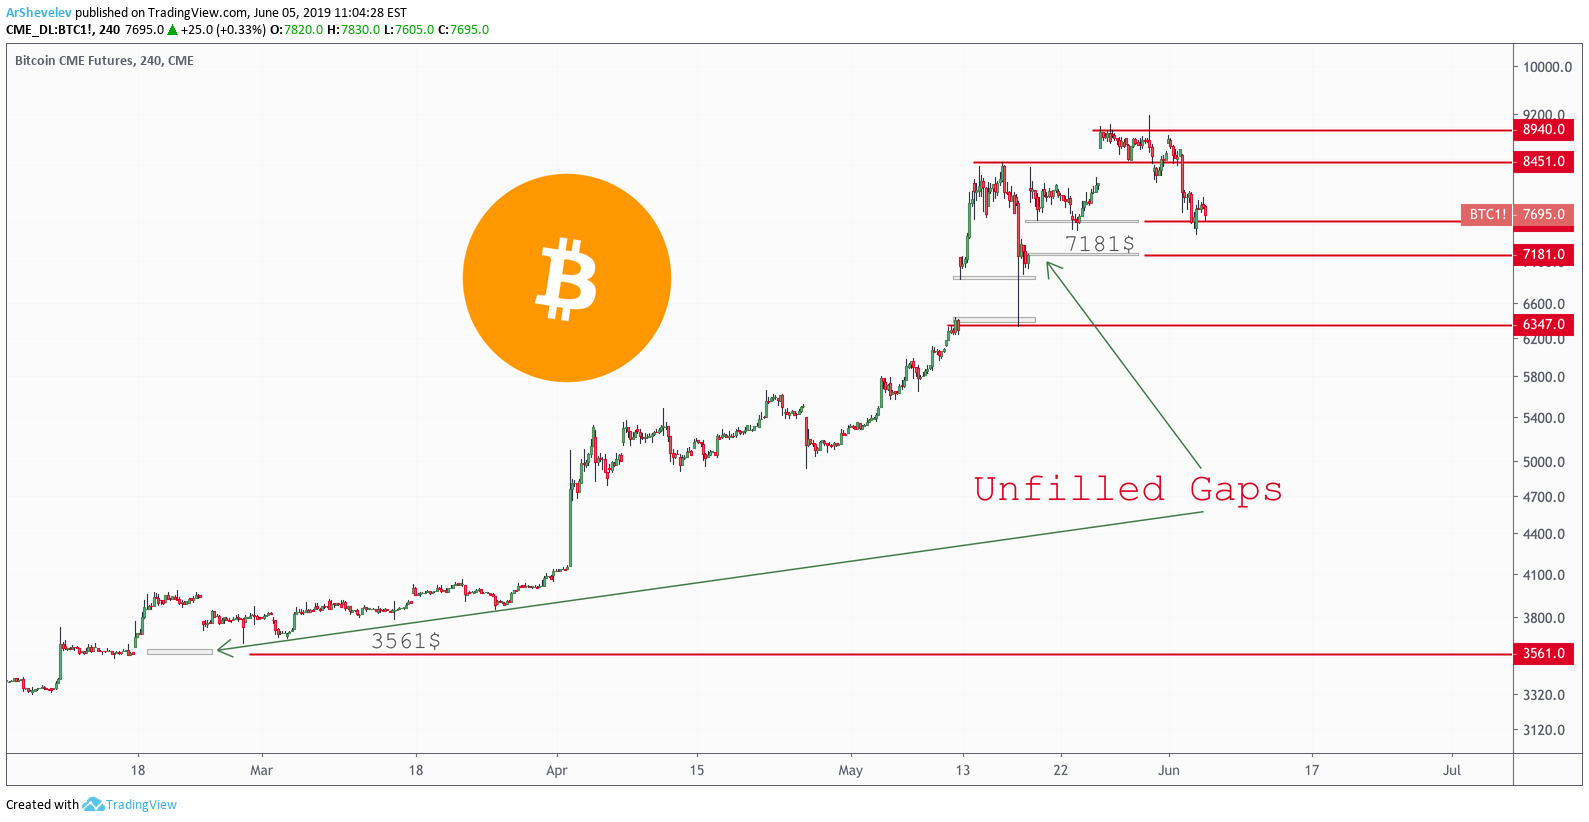 Market Outlook: Bitcoin's Inverse Head and Shoulders, Covid-19 Fears Decline, CME Futures Gaps